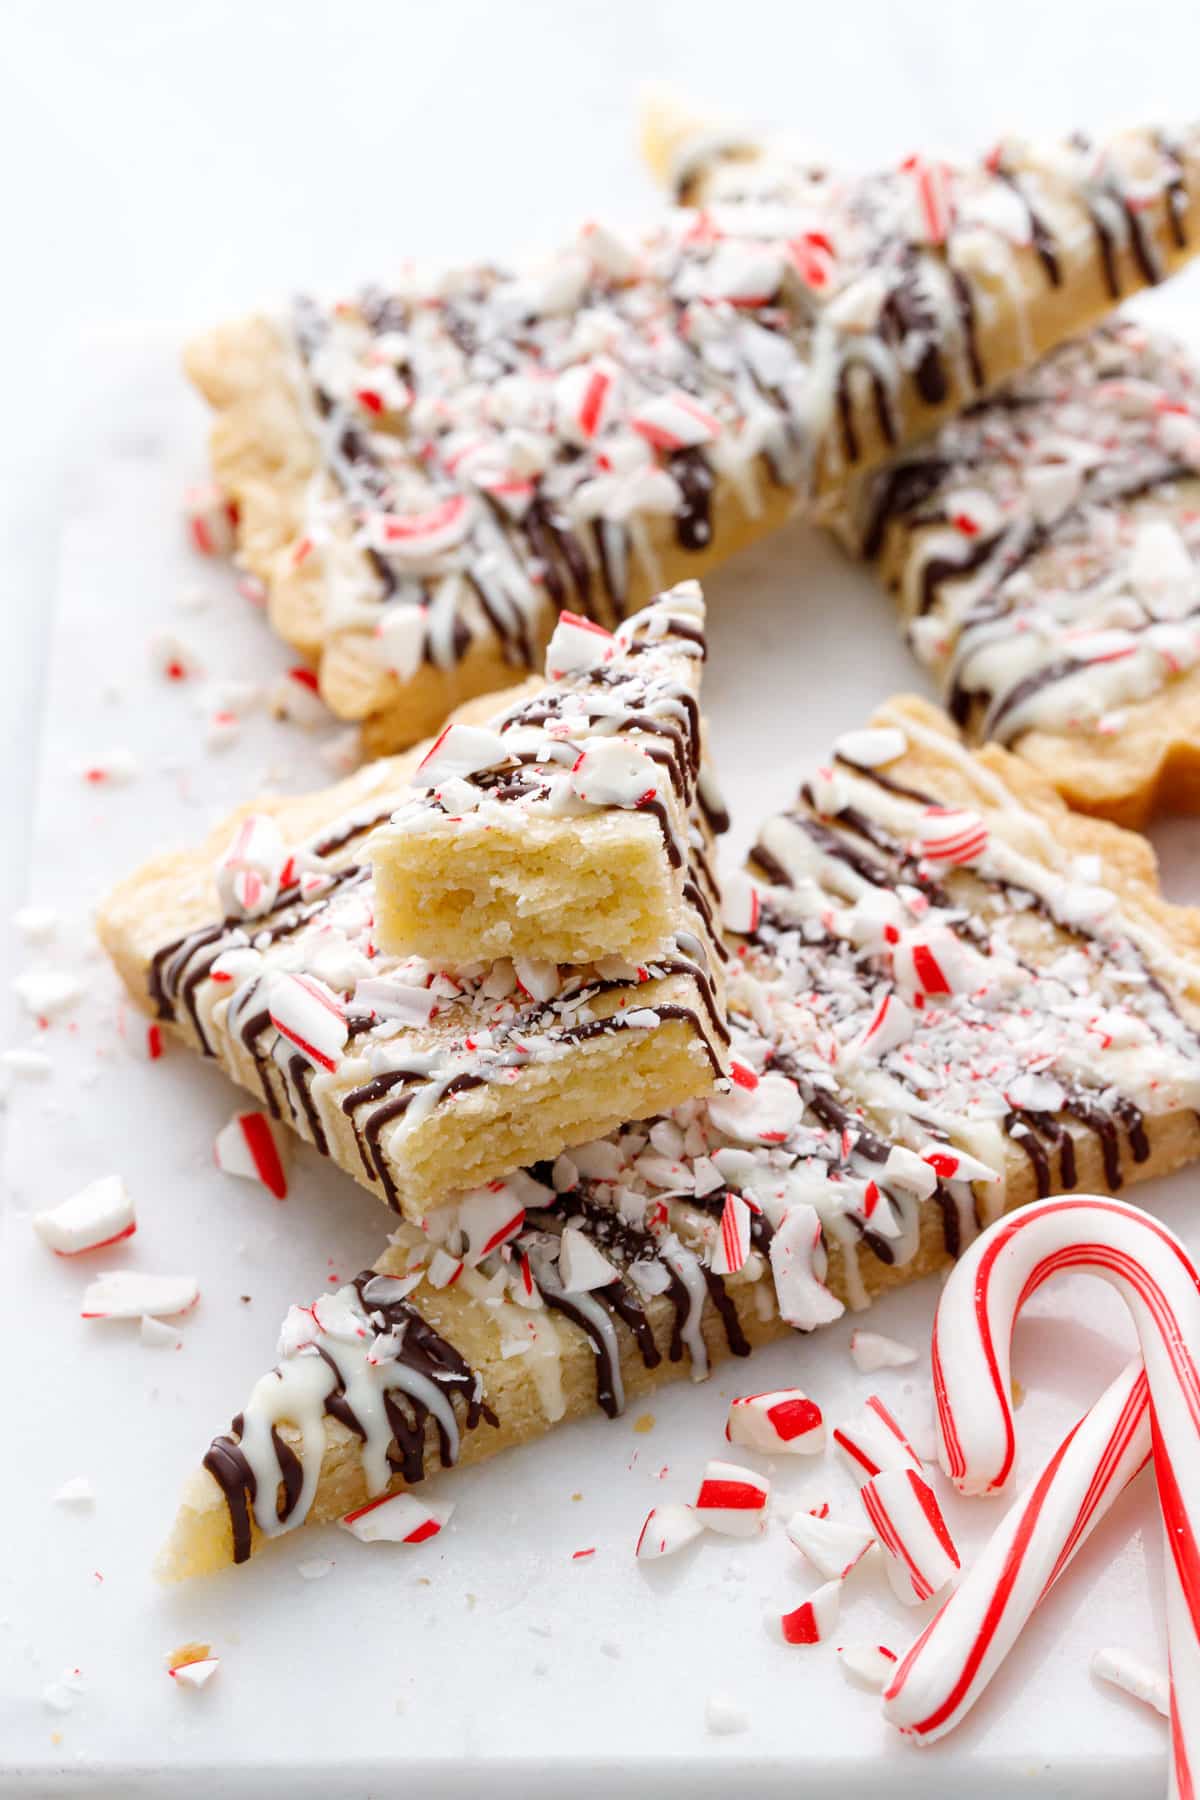 Messy arrangment of Peppermint Bark Shortbread, one cookie broken in two to show the tender interior texture.